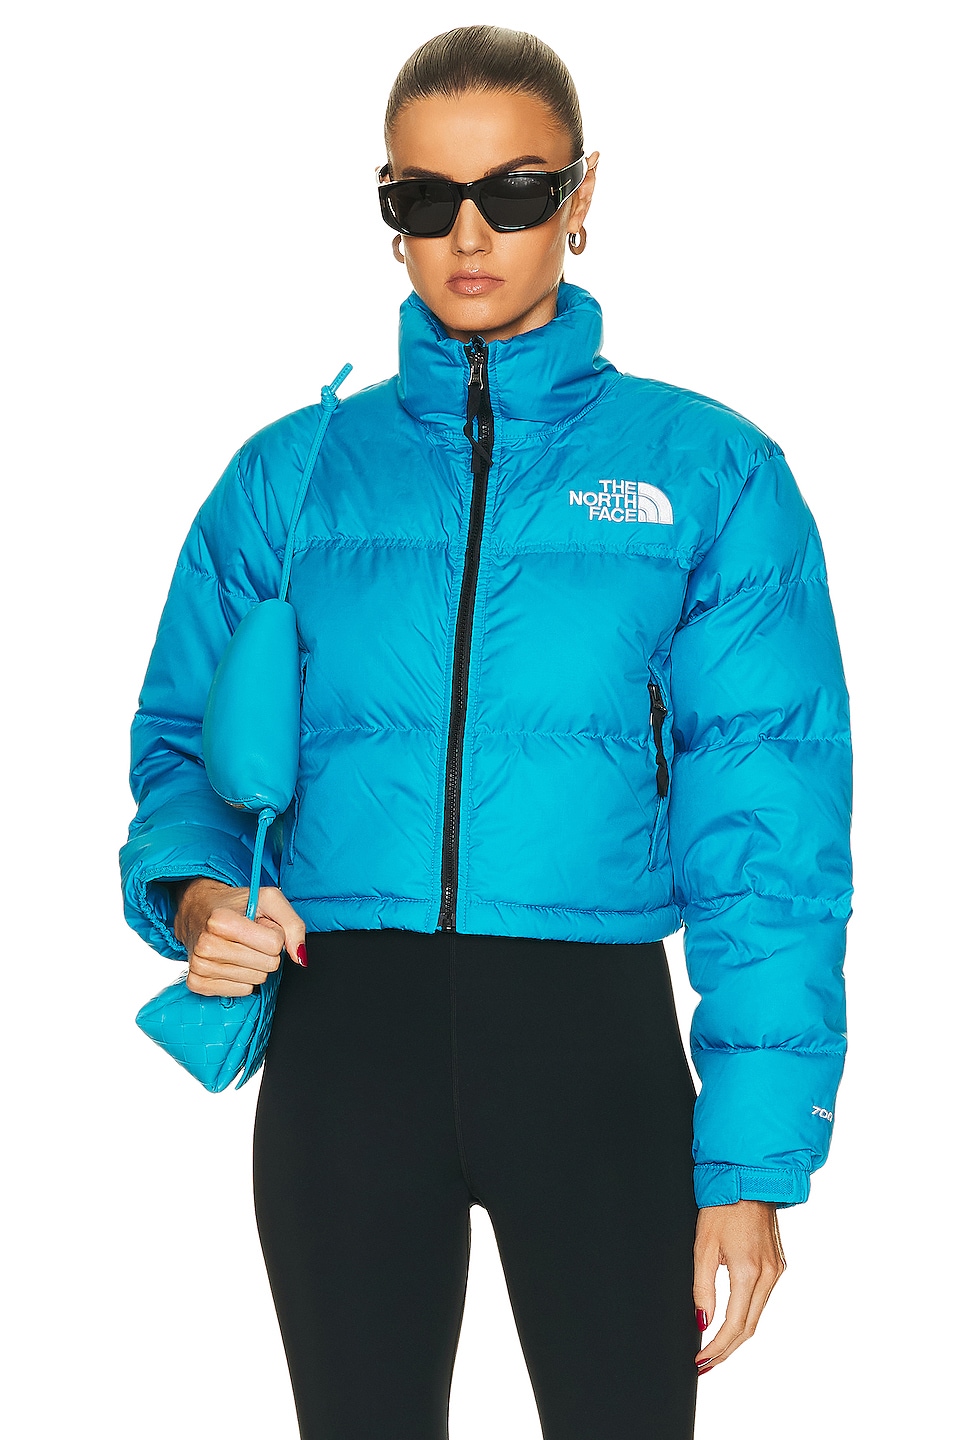 The North Face Nuptse Short Jacket in Acoustic Blue | FWRD